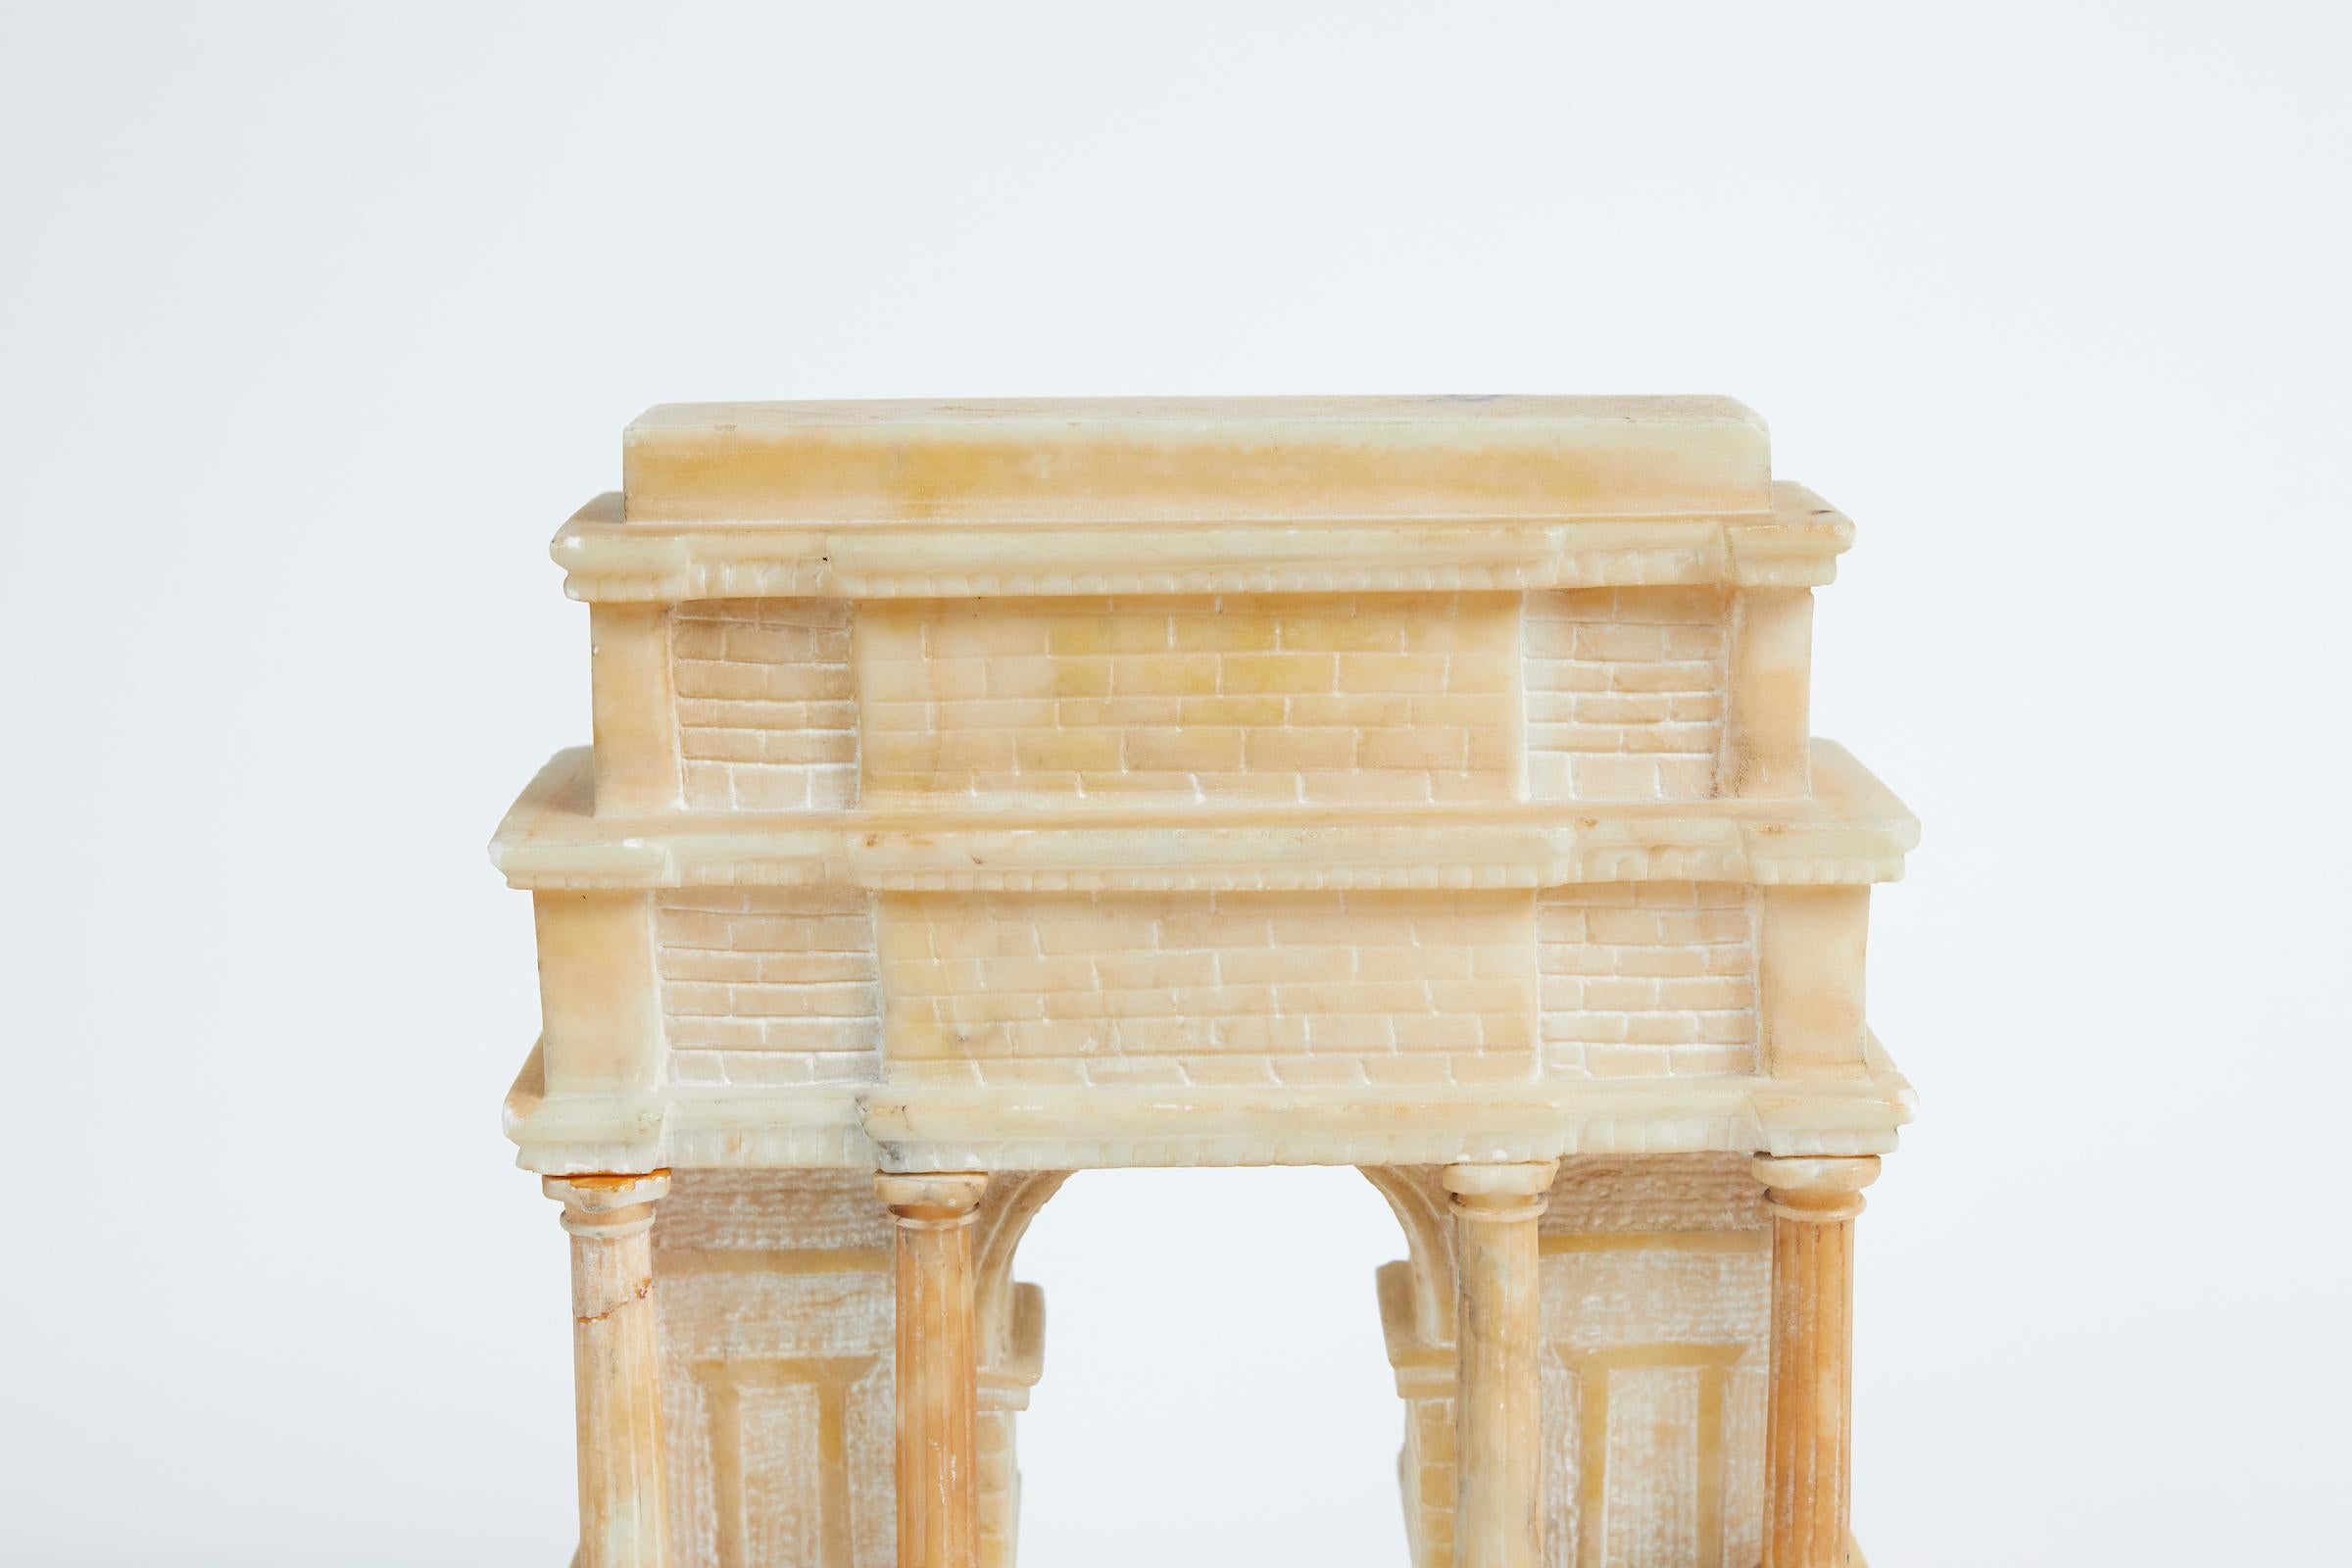 19th Century Carved Alabaster Grand Tour Model of Titus Arch in Rome 4